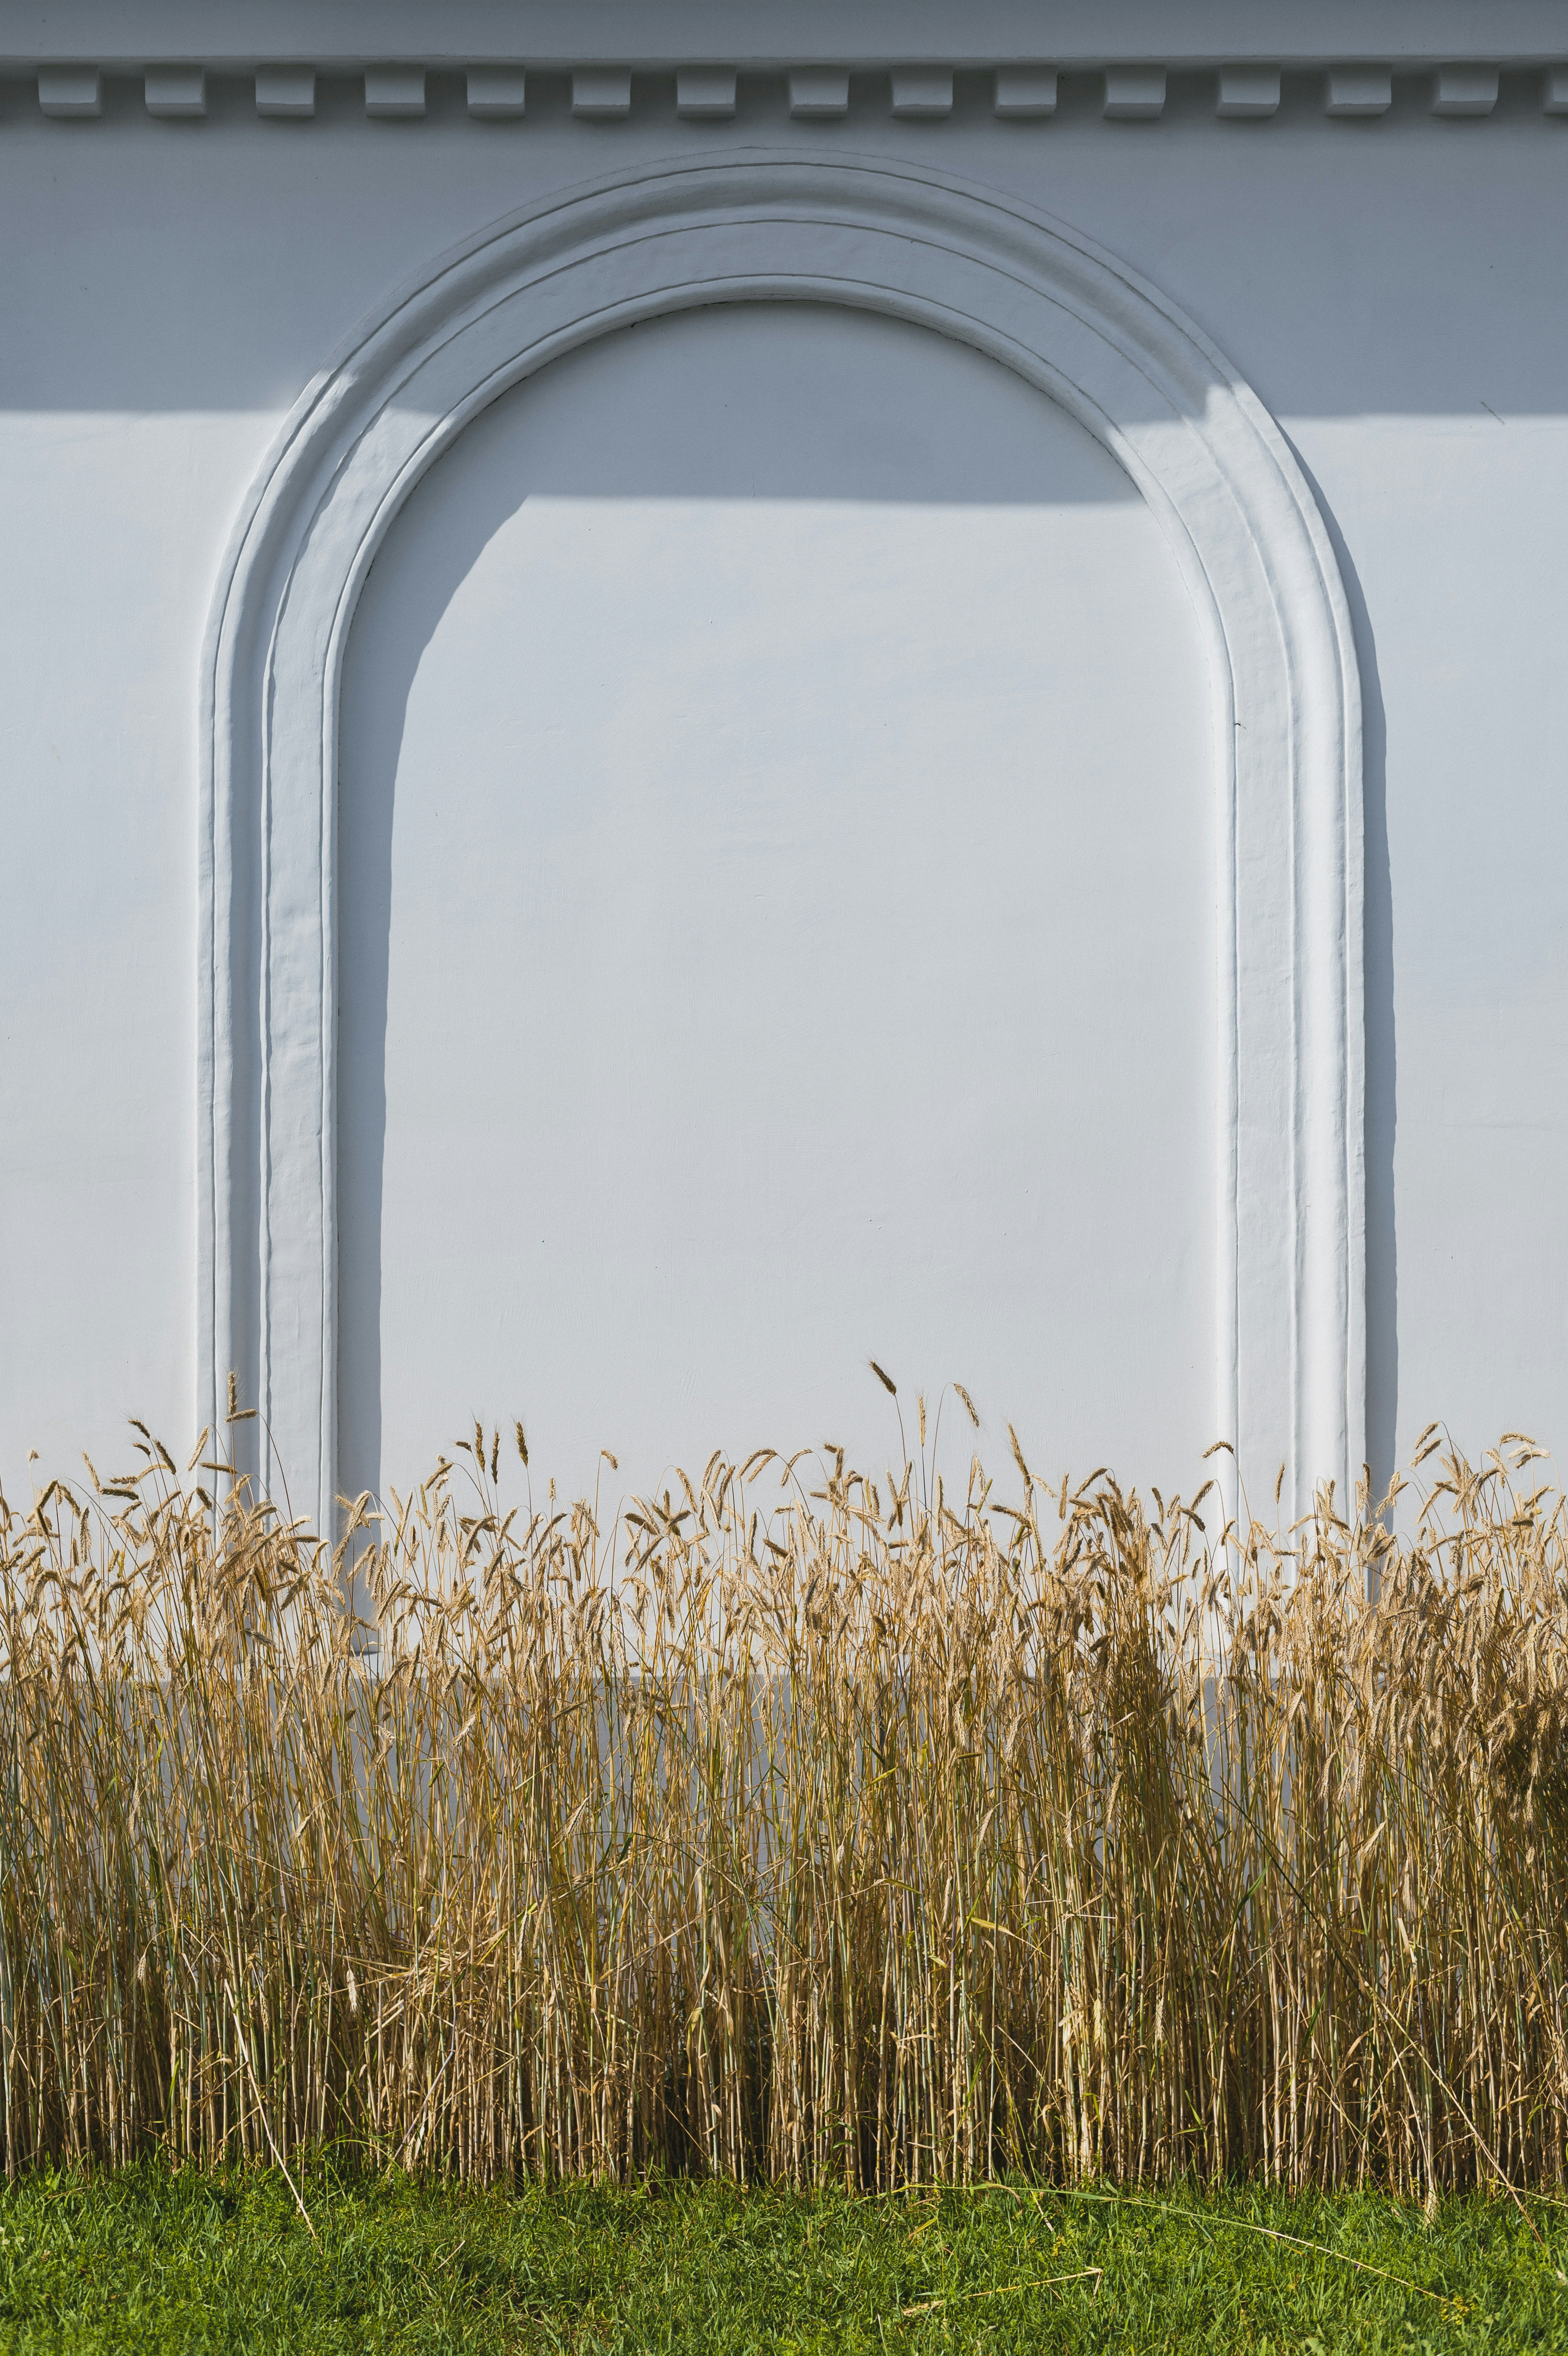 A wall with an arch and ears of wheat.